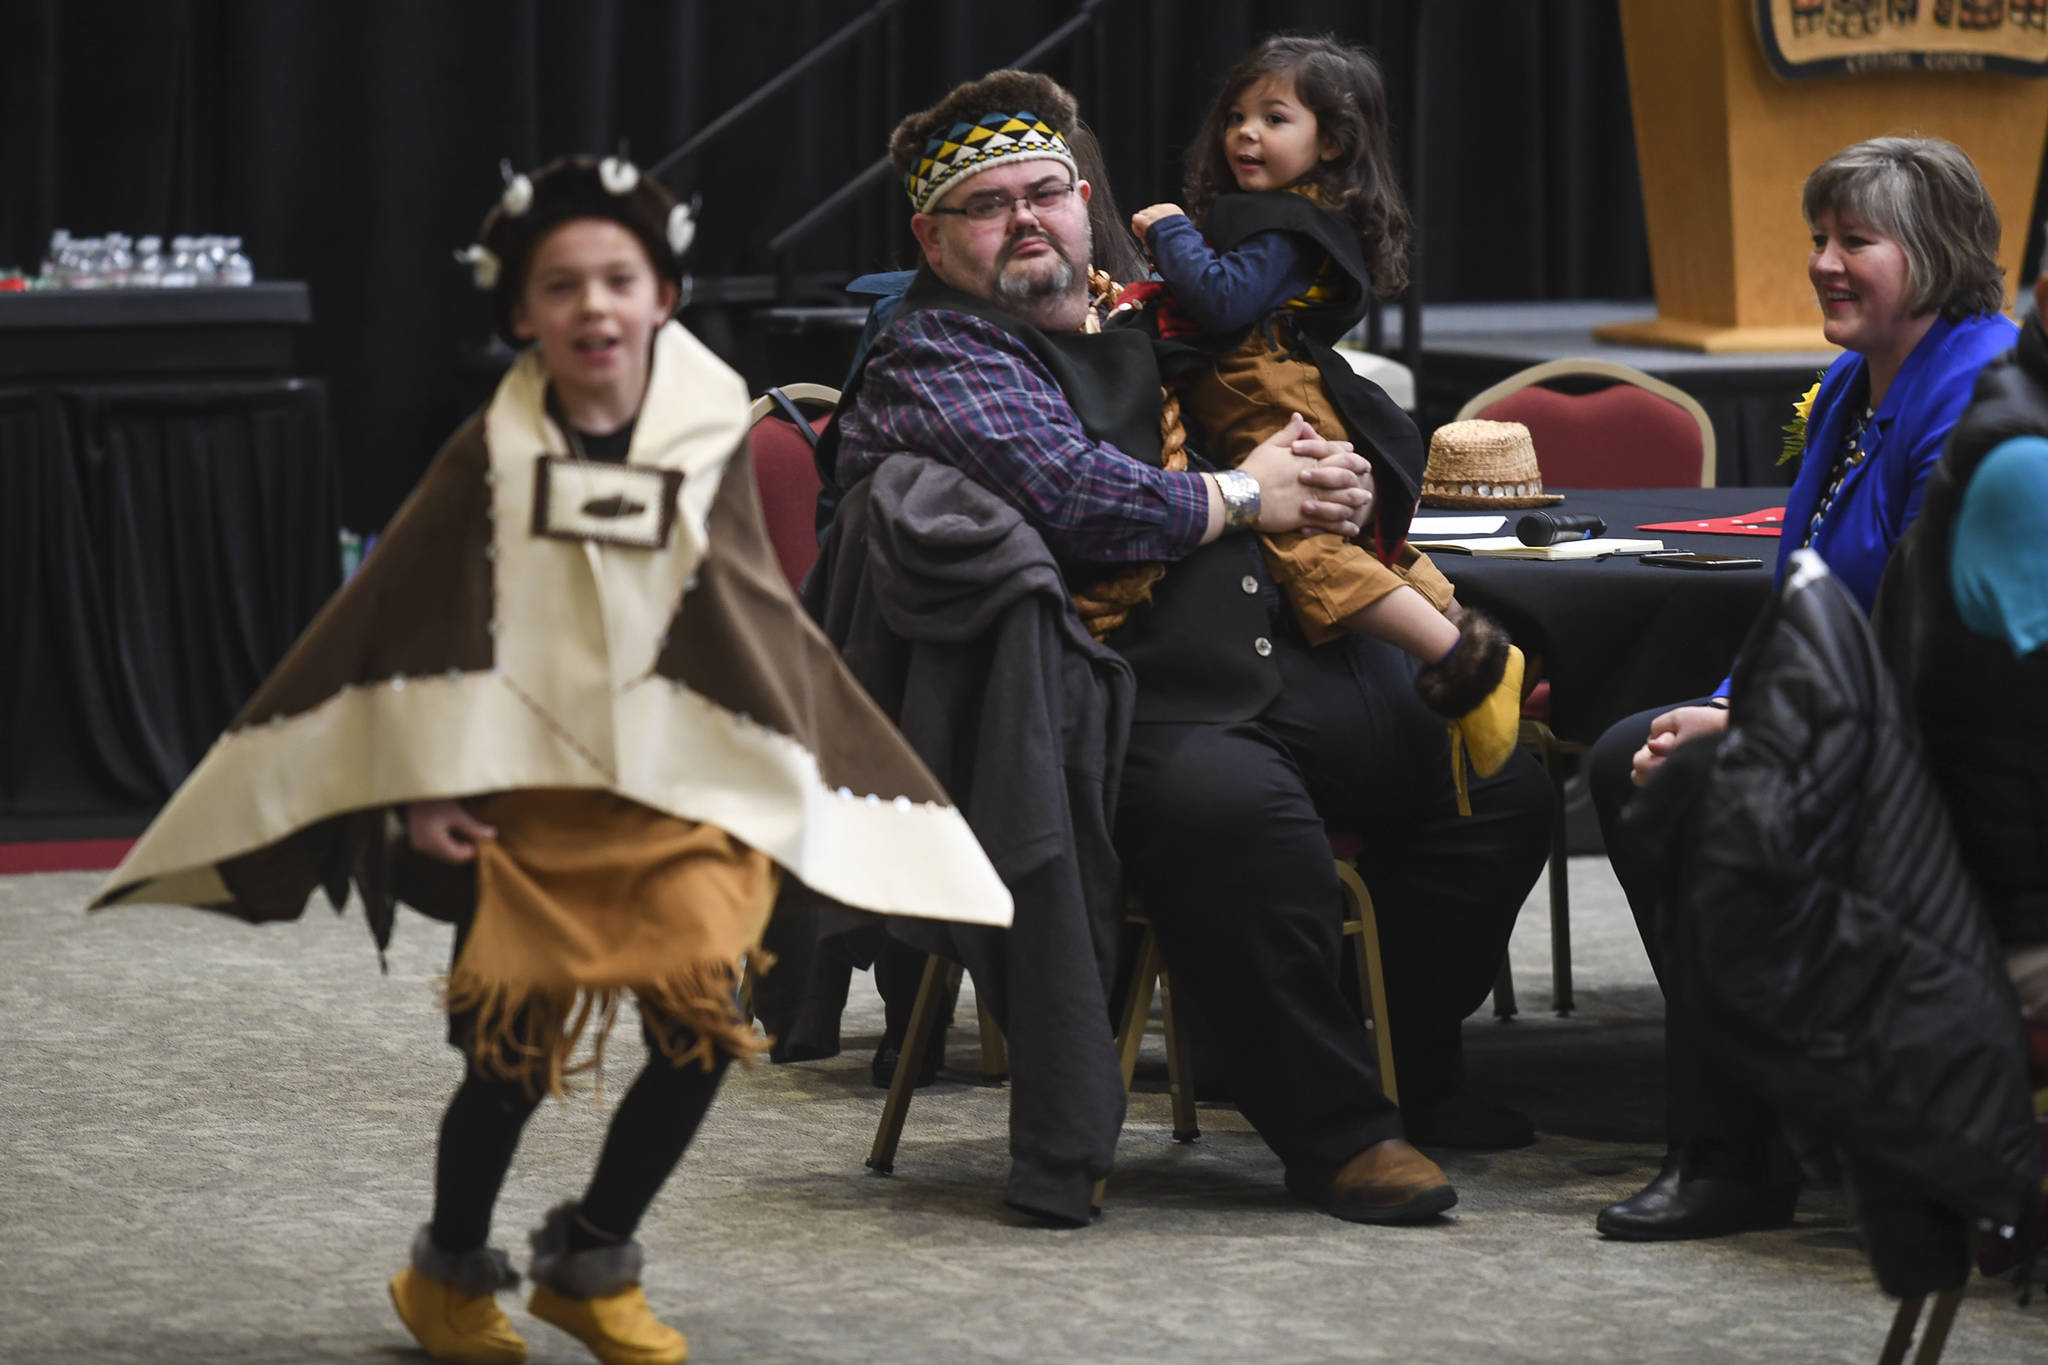 Photos: Indigenous Peoples Day in Juneau